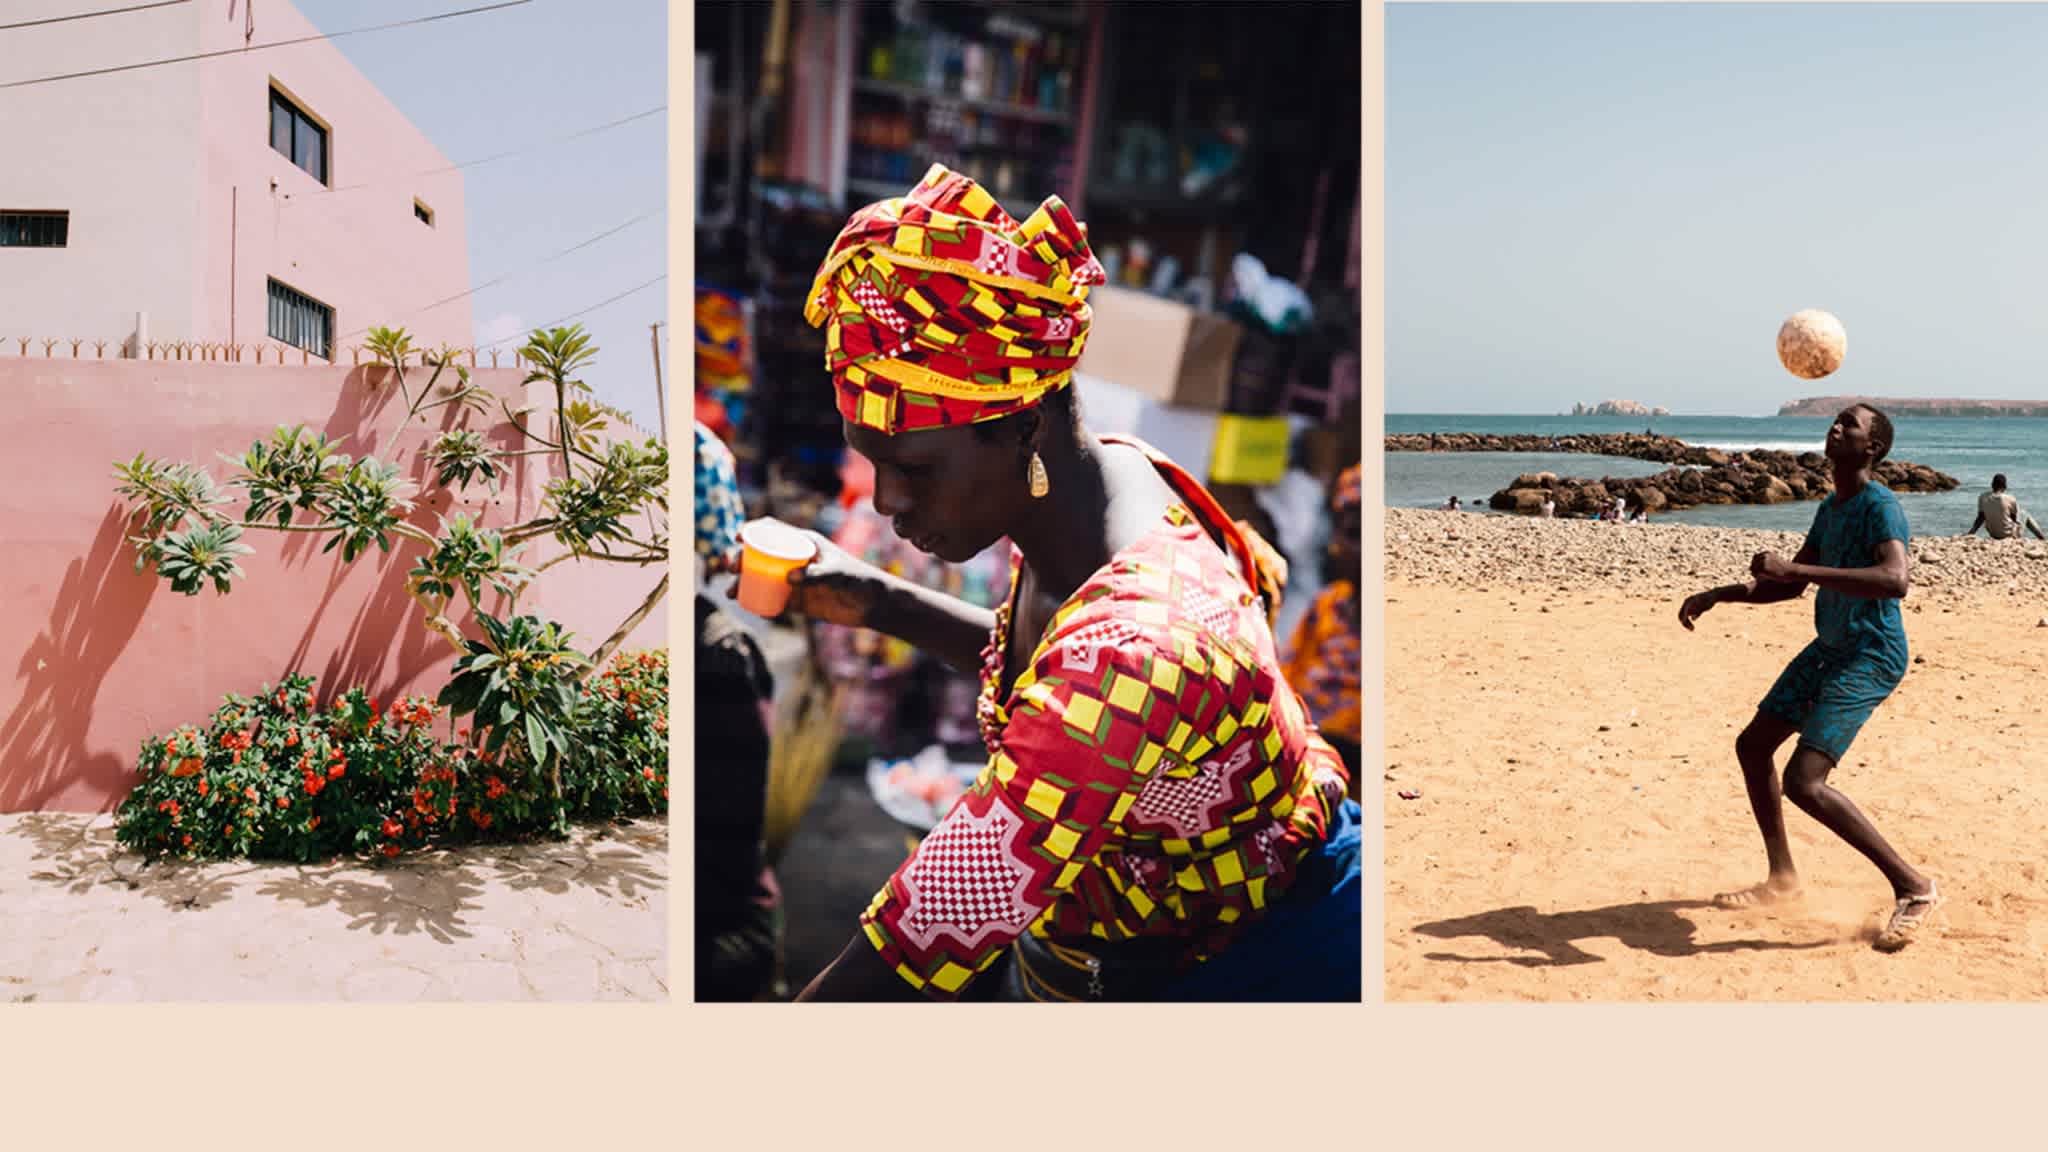 Discovering Dakar, the coastal capital on Africa’s westernmost tip